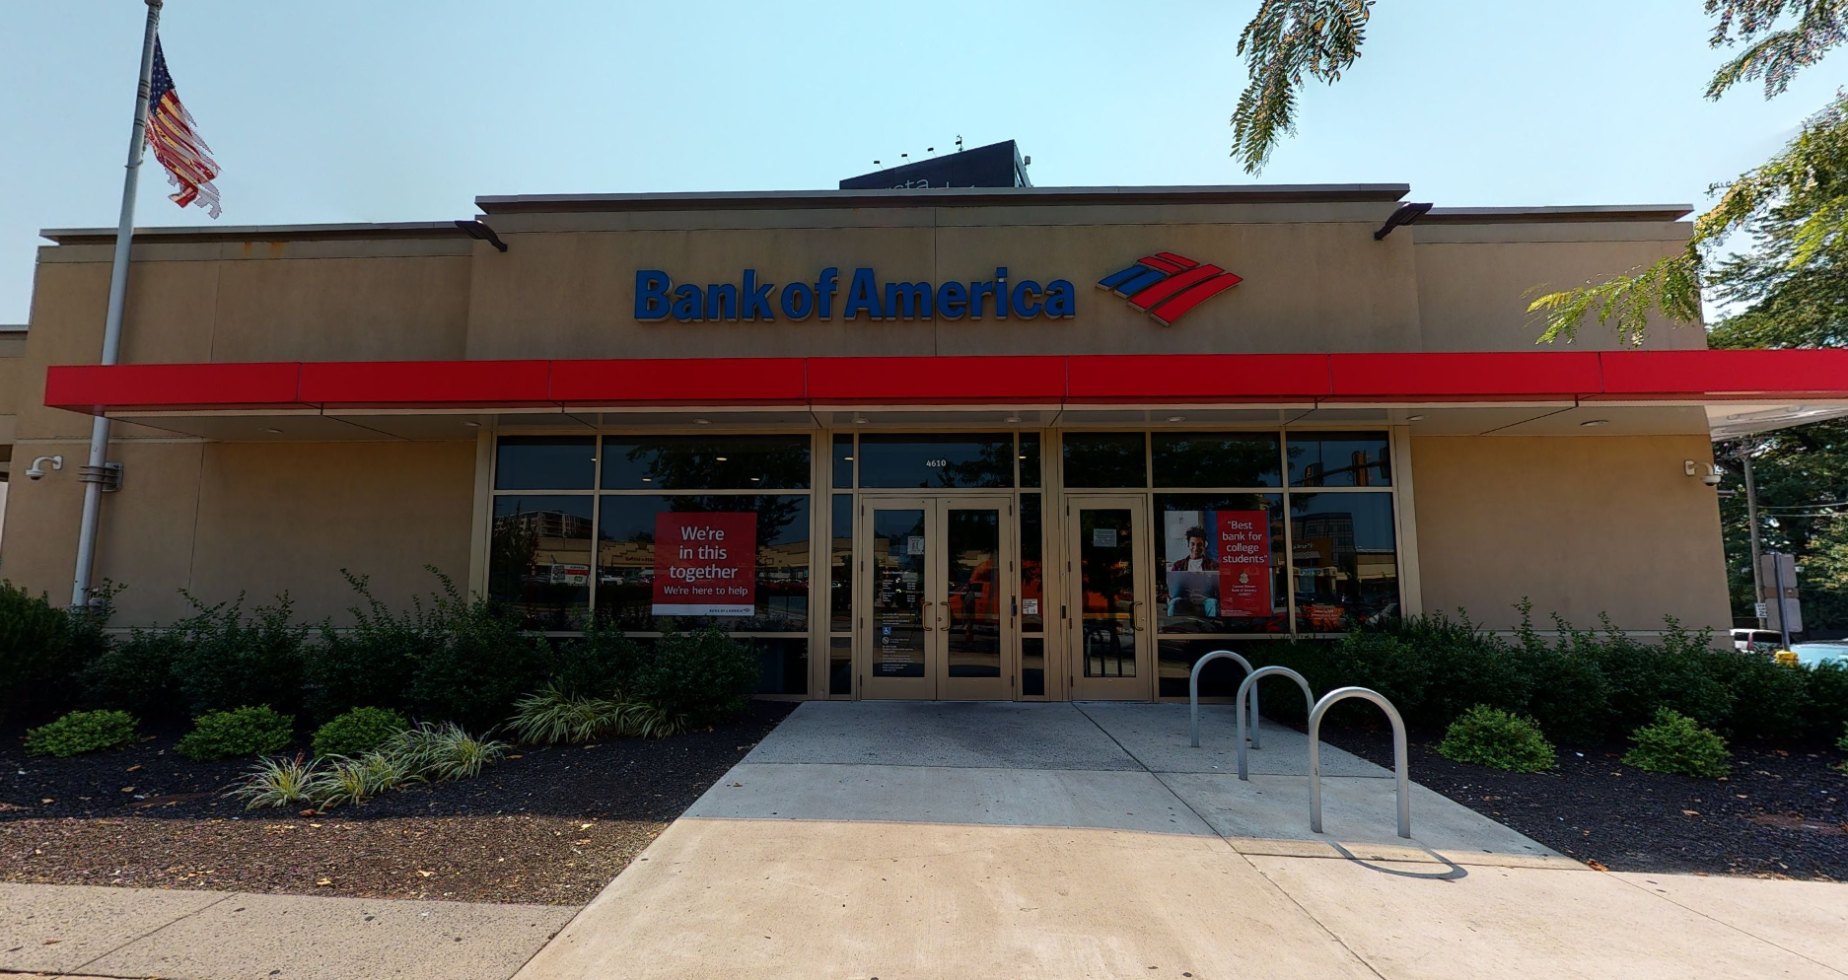 Bank of America financial center with drive-thru ATM and teller | 4610 City Ave, Philadelphia, PA 19131